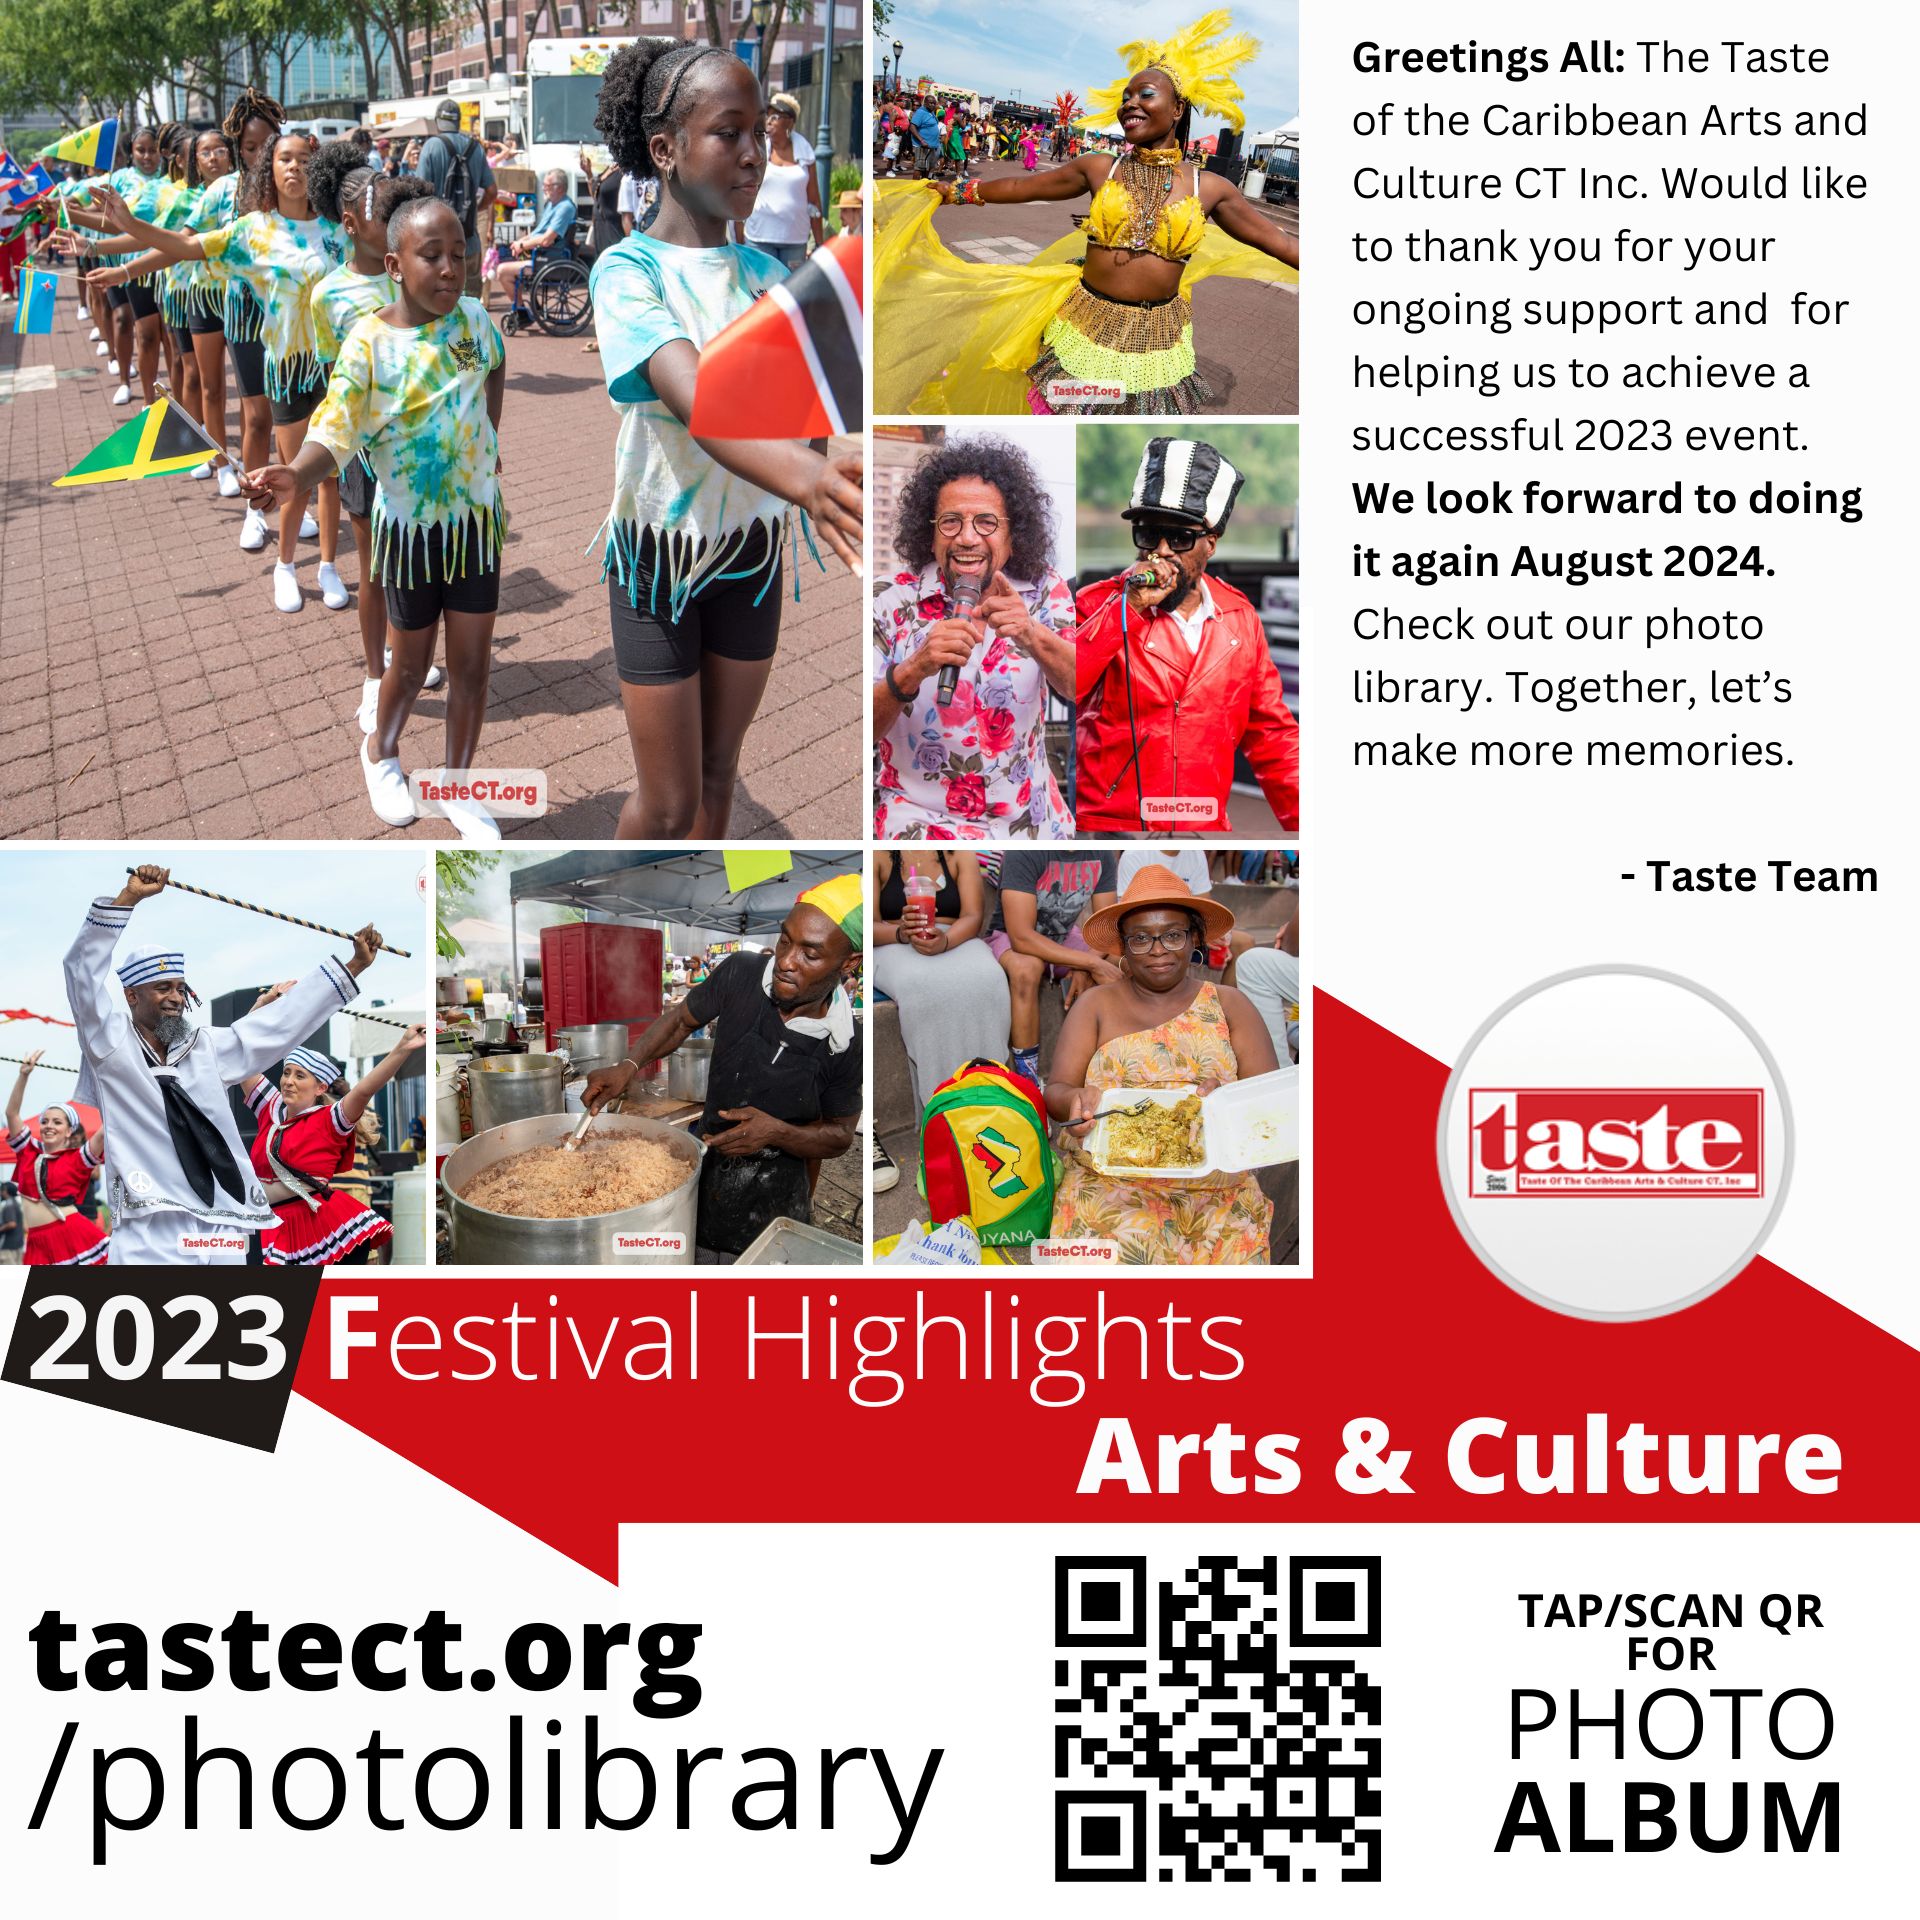 Thank you - 2023 Festival Highlights - Photo Library - Taste of the Caribbean Arts and Culture, TasteCT